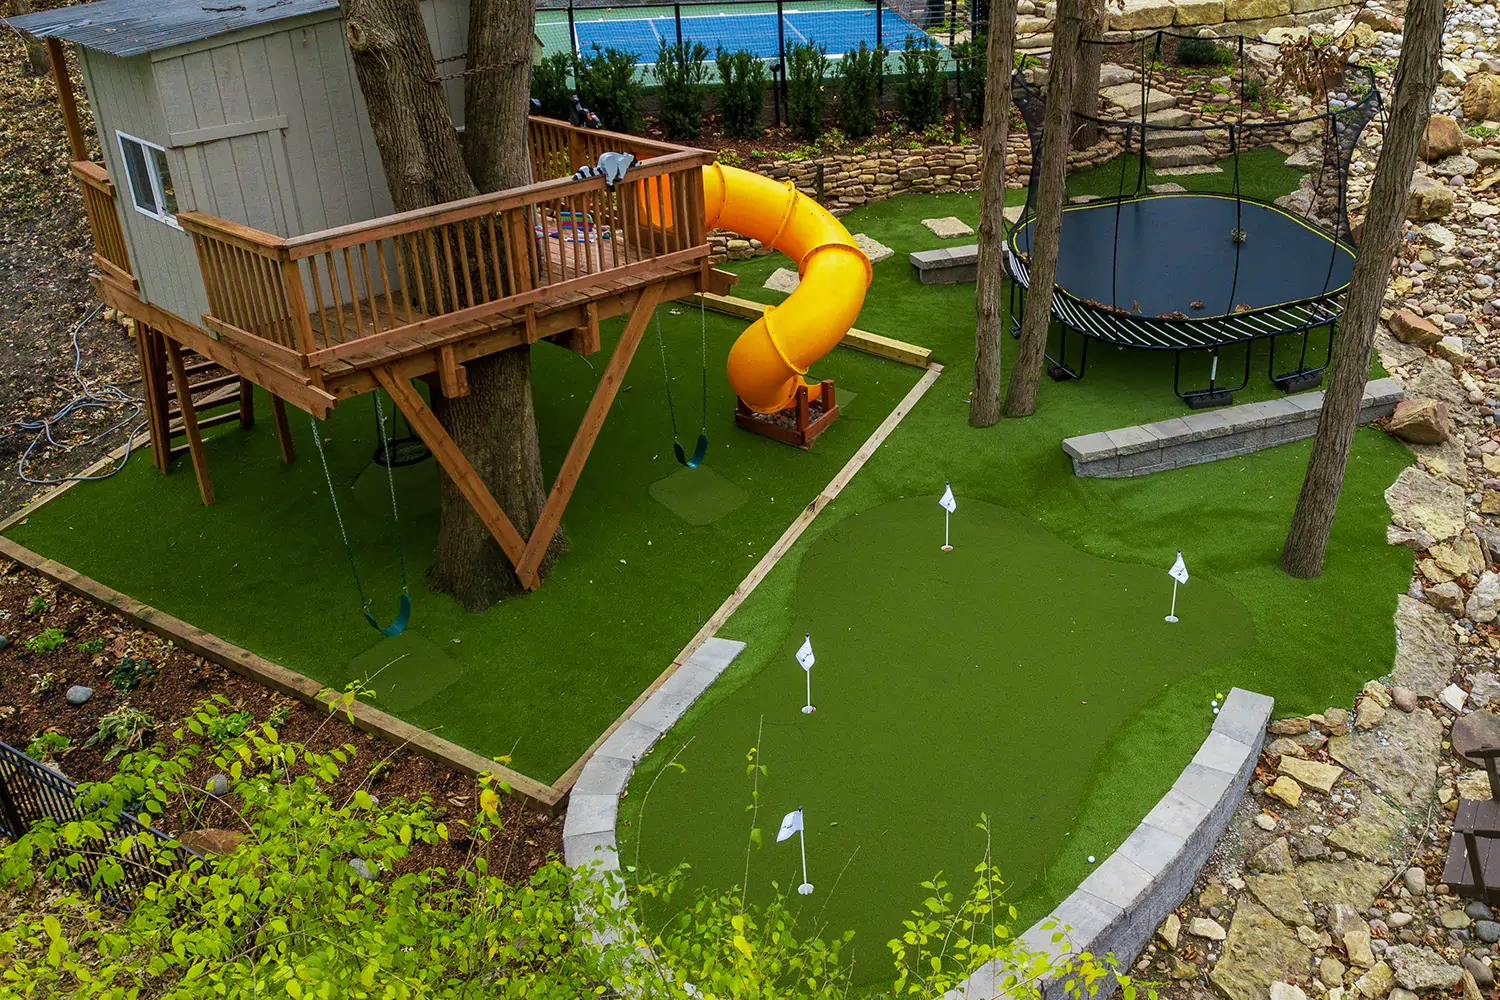 Backyard putting green from SYNLawn with yellow slide